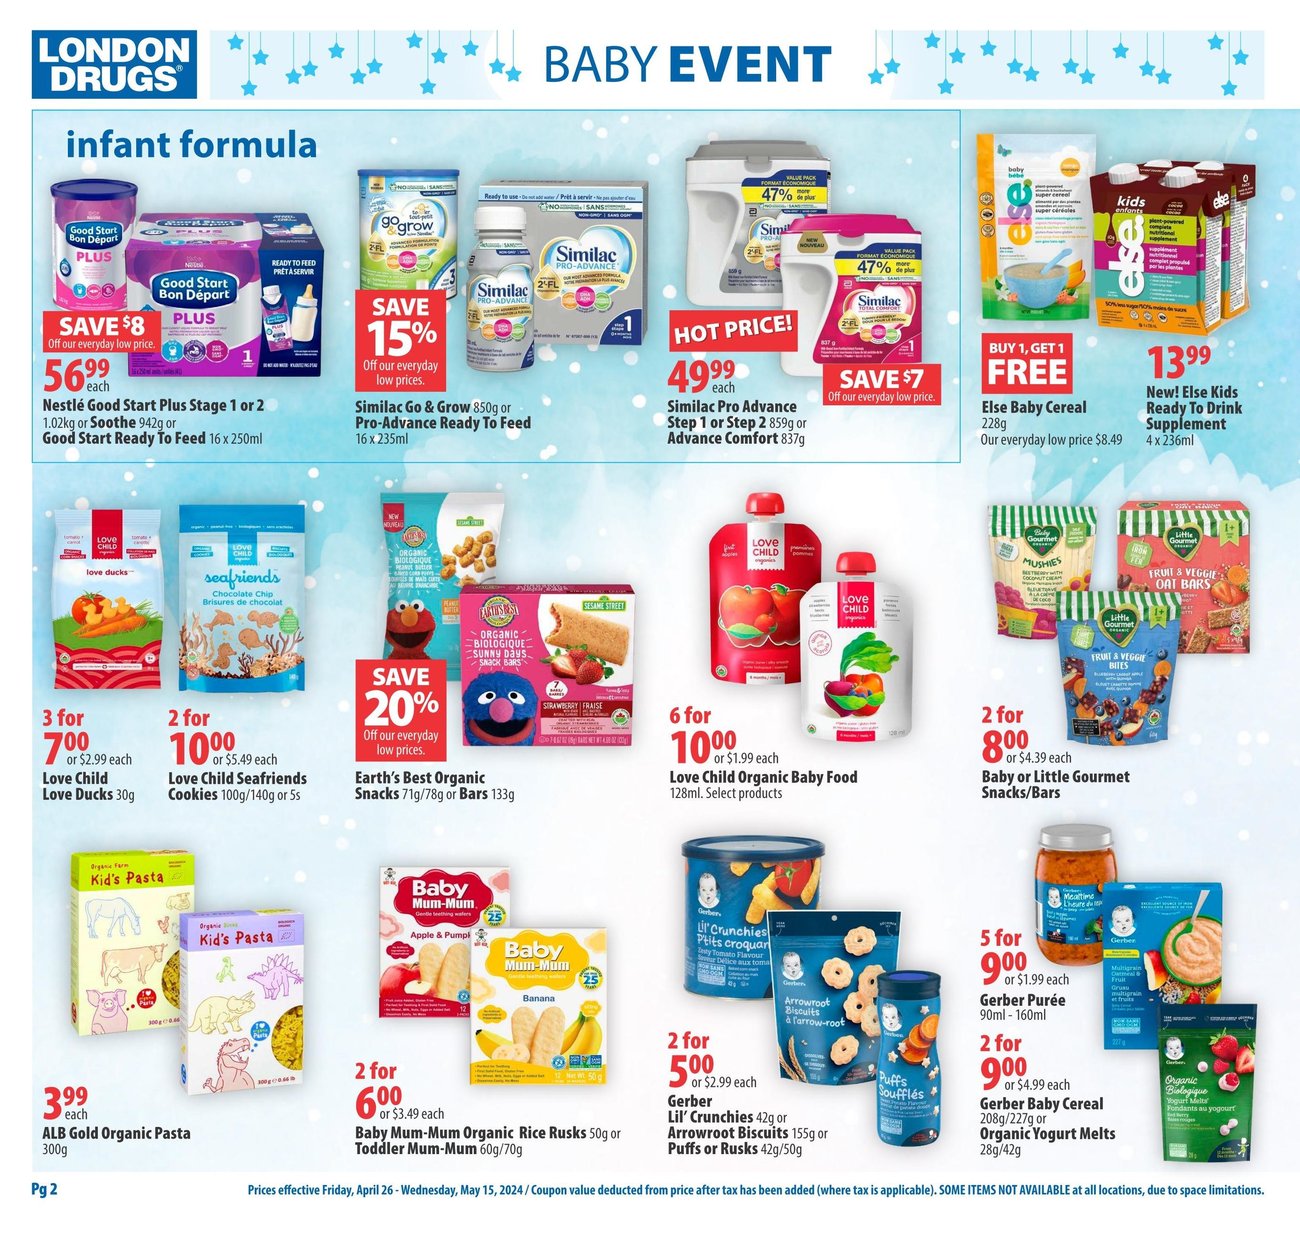 London Drugs - Baby Event - Page 3